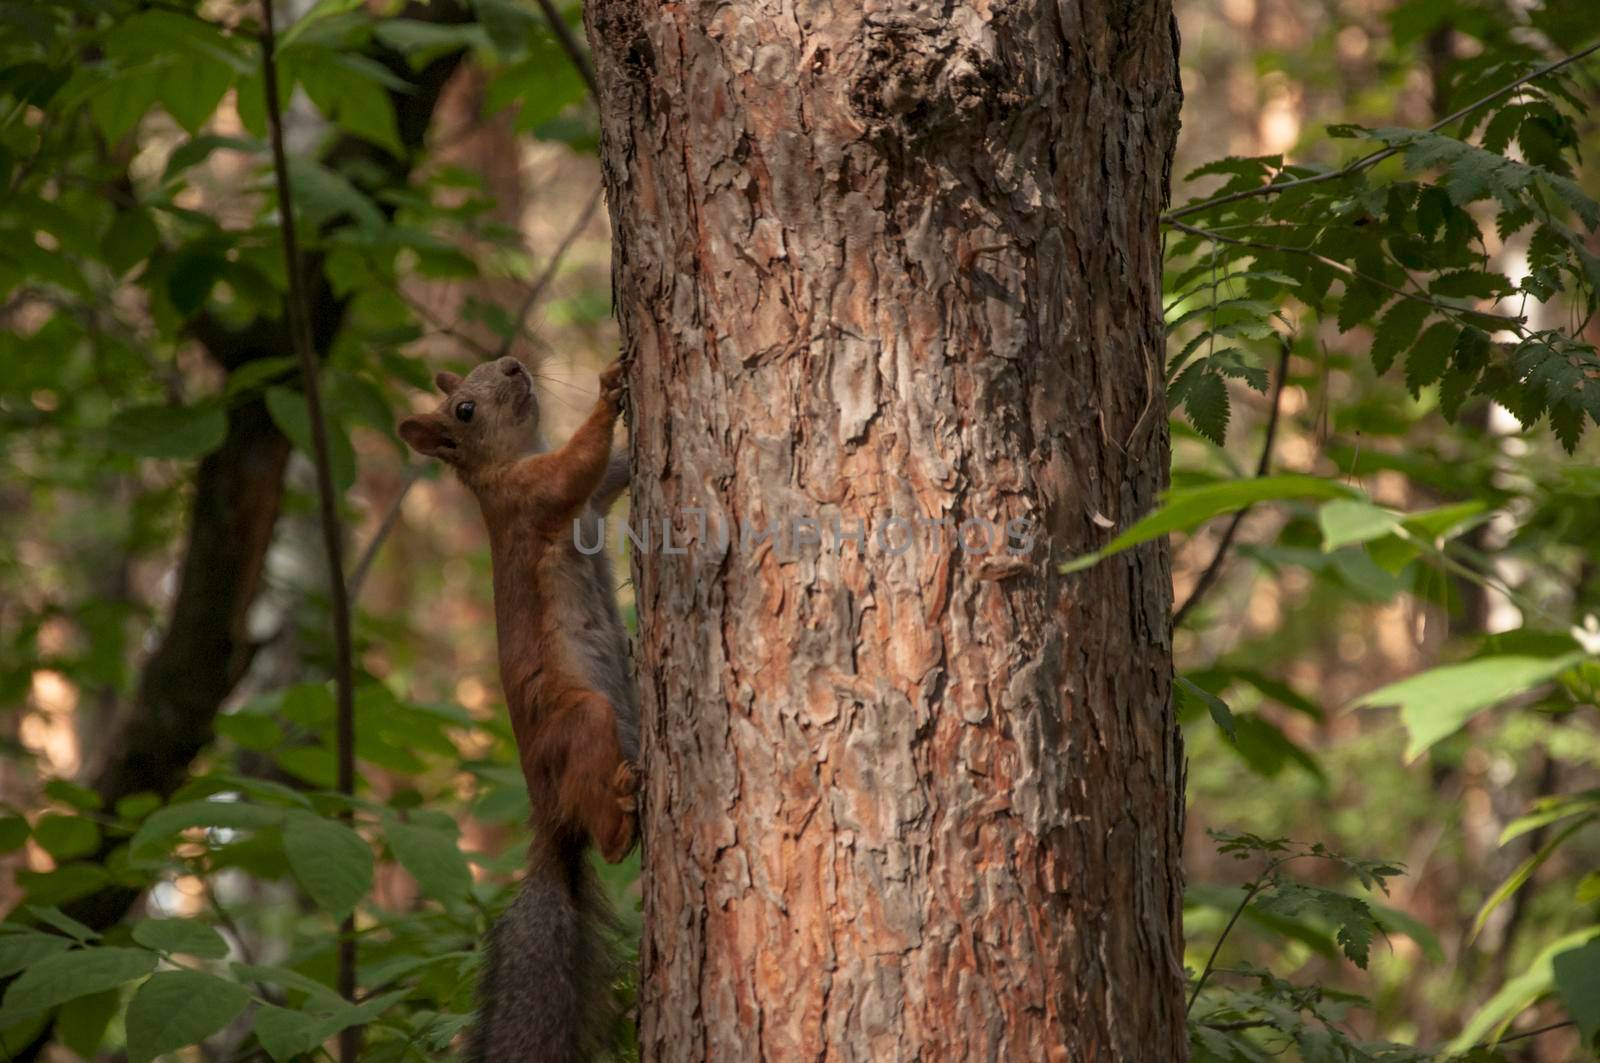 A small squirrel on a tree branch among the leaves on a bright day. Red squirrel sits on a tree branch in park